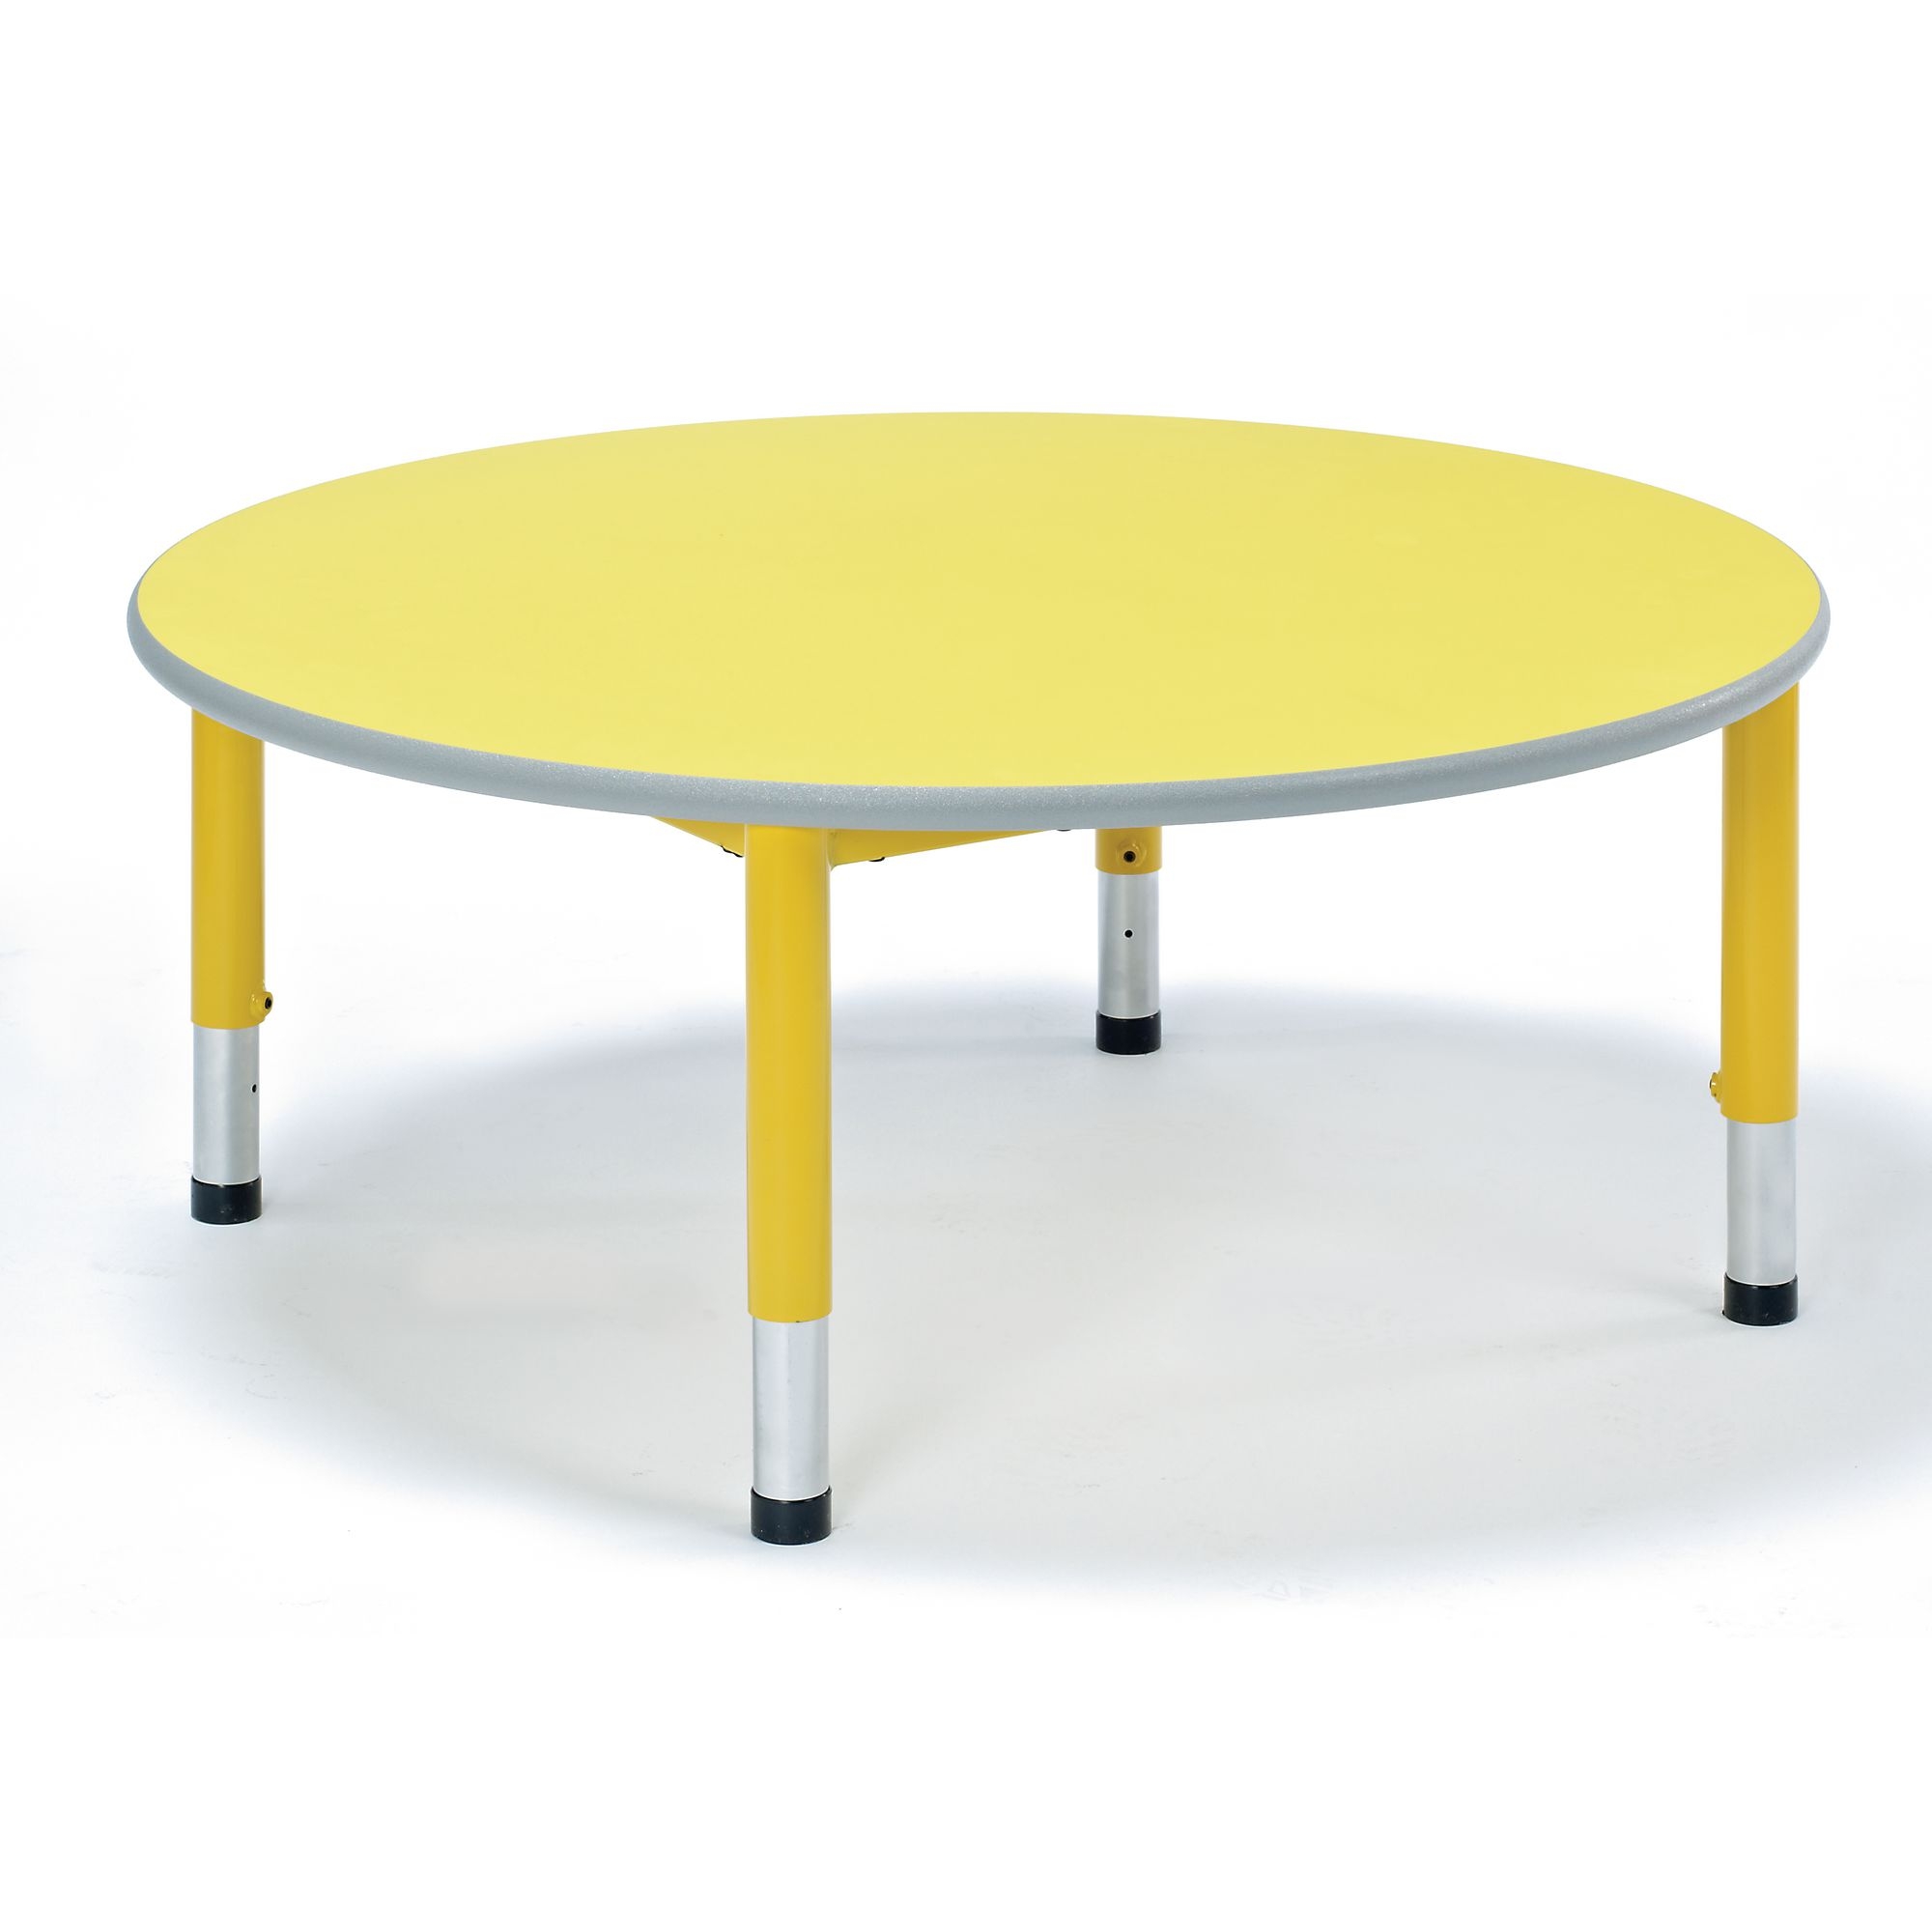 Harlequin Circular Height Adjustable Steel Classroom Table - 1050 x 400 to 640mm - Tangy Lime